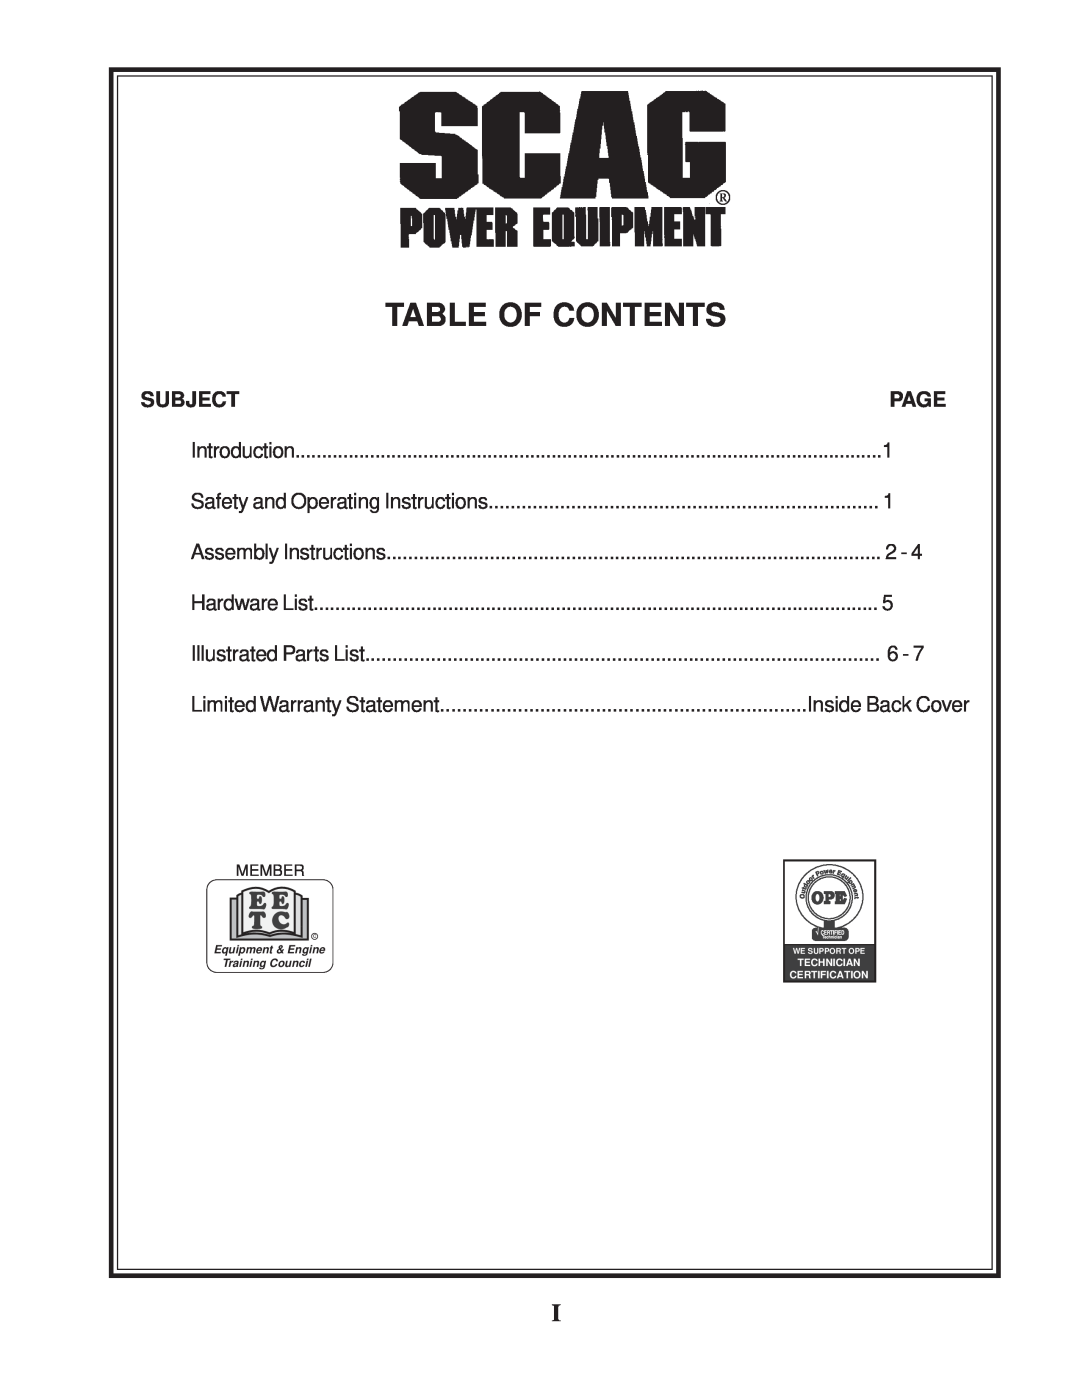 Scag Power Equipment RS-ZT manual Table Of Contents, Subject, Page, Inside Back Cover, Equipment & Engine Training Council 